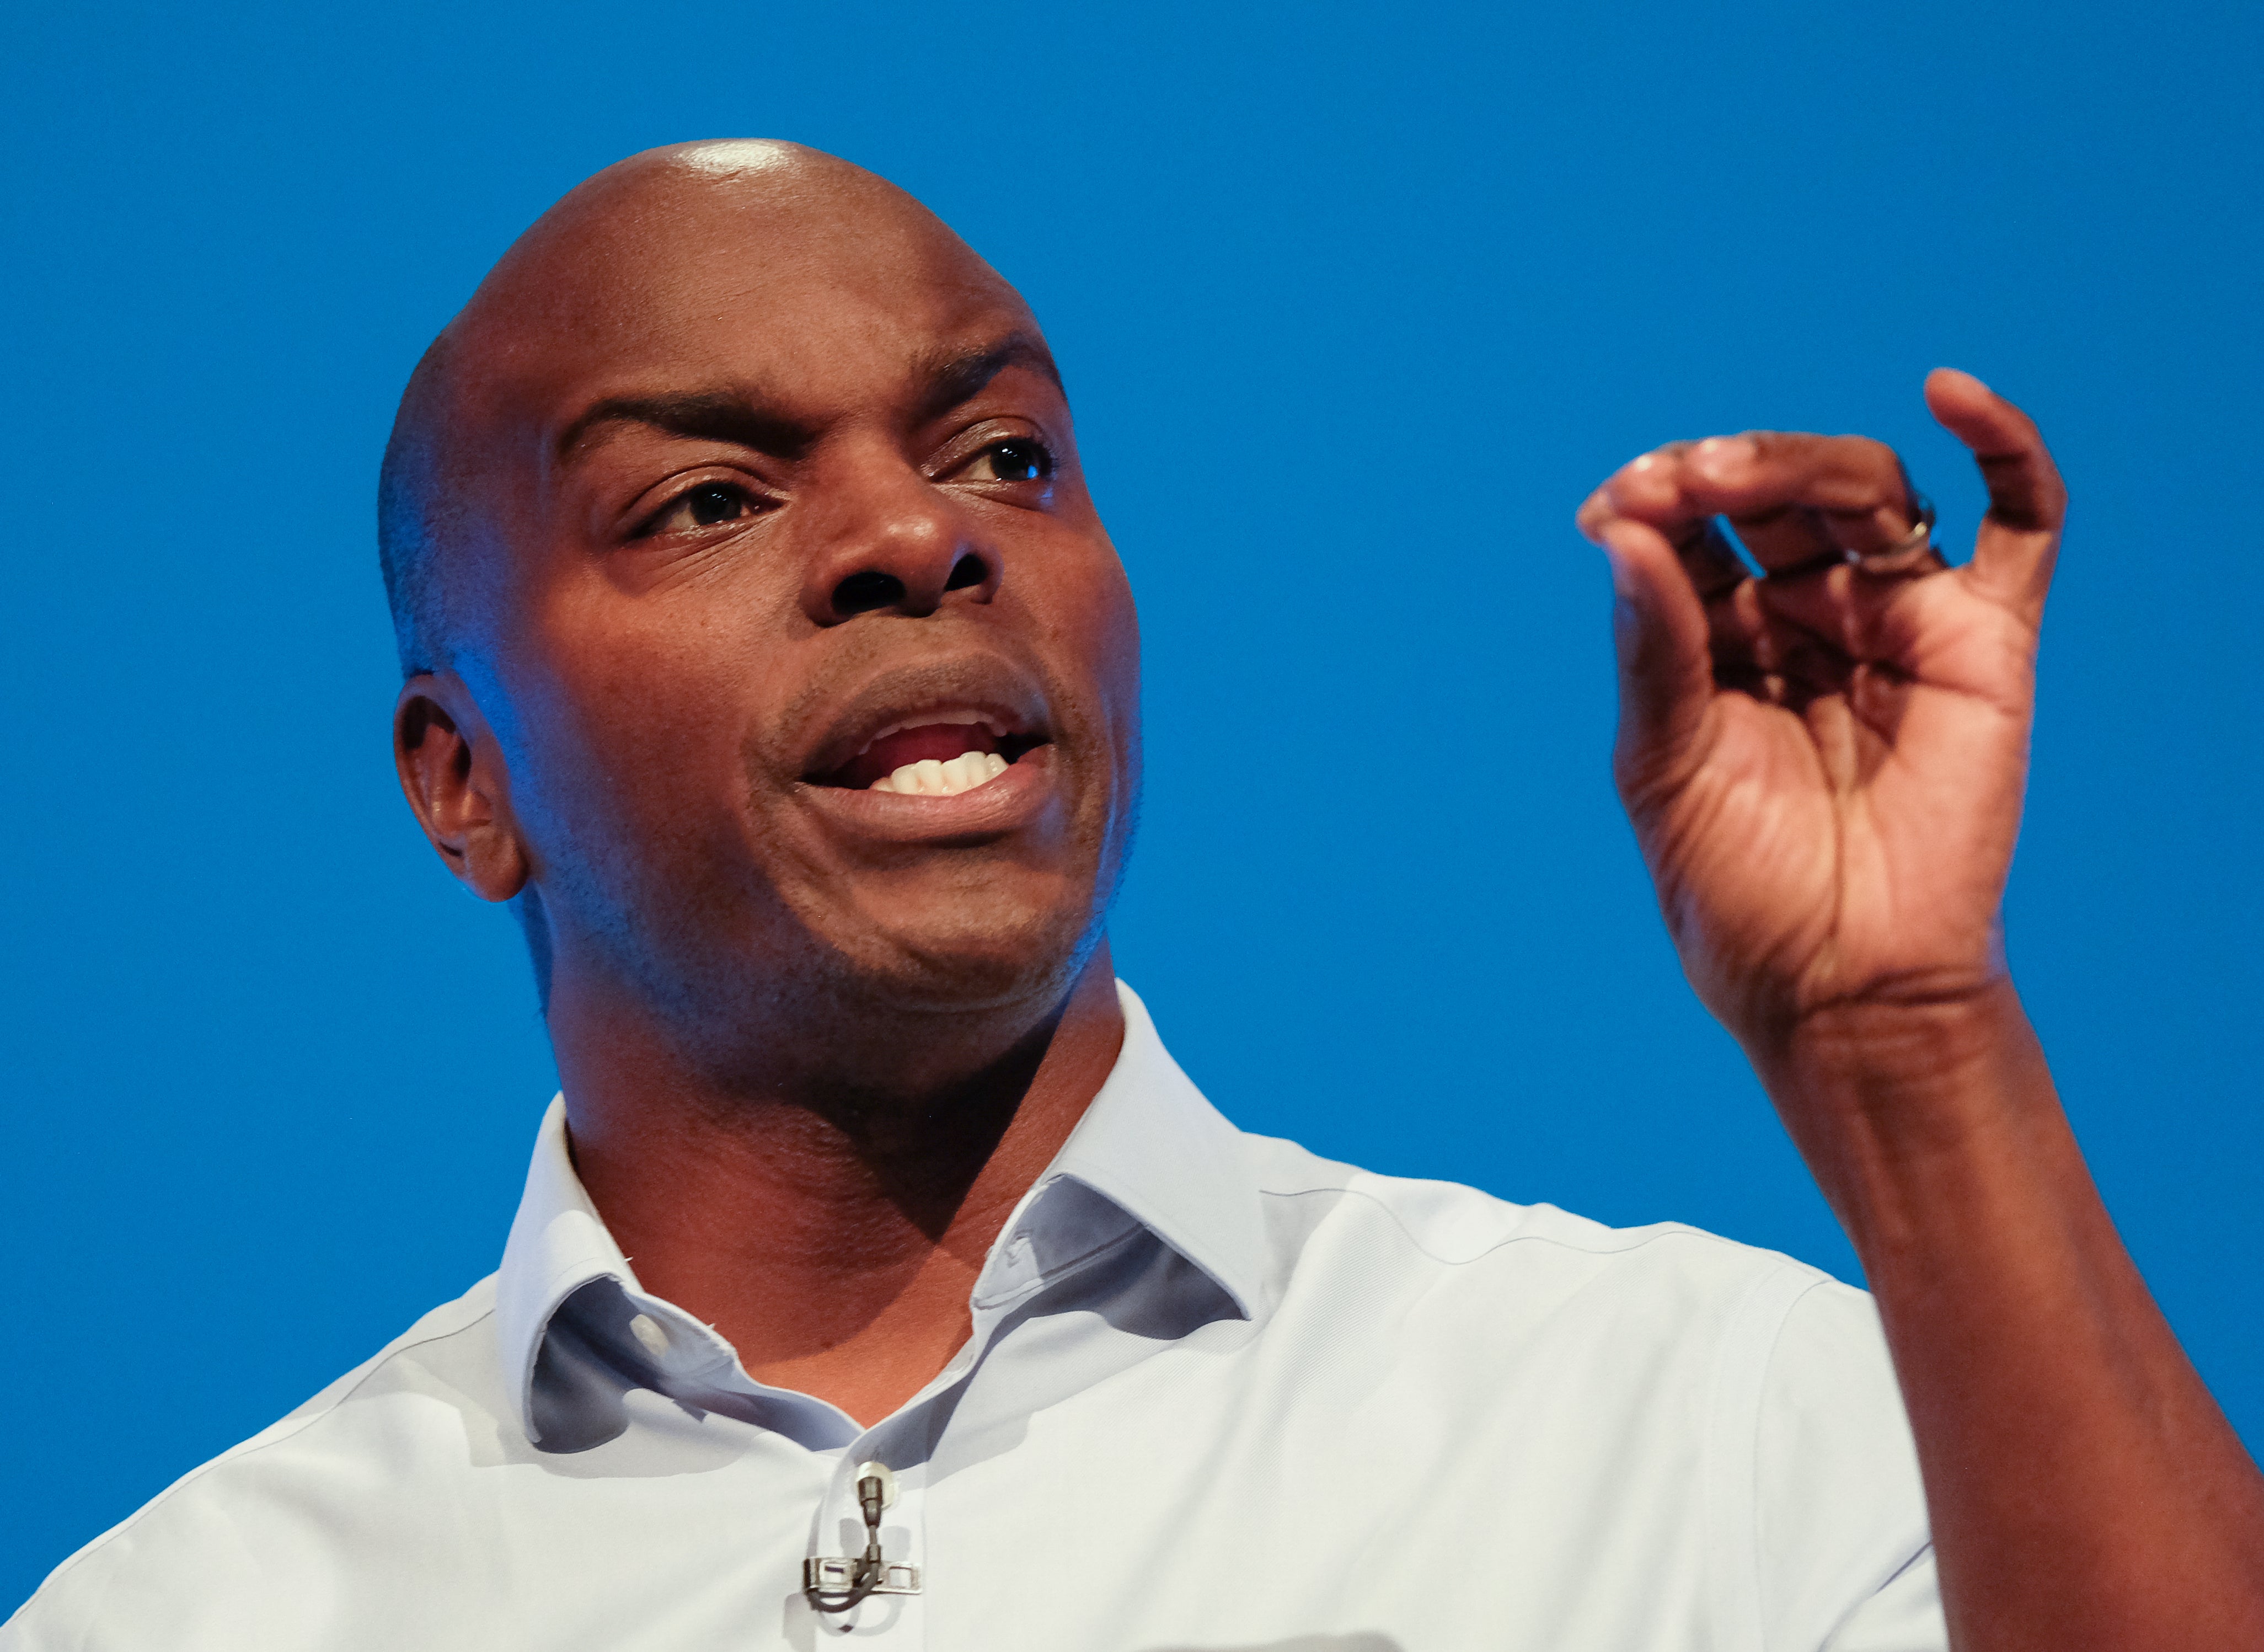 Shaun Bailey. Conservative candidate for the Mayor of London delivers a speech on the third day of the Conservative Party Conference at Manchester Central at Manchester Central on October 01, 2019 in Manchester, England. Mr Bailey has come under fire over a new flyer campaign.